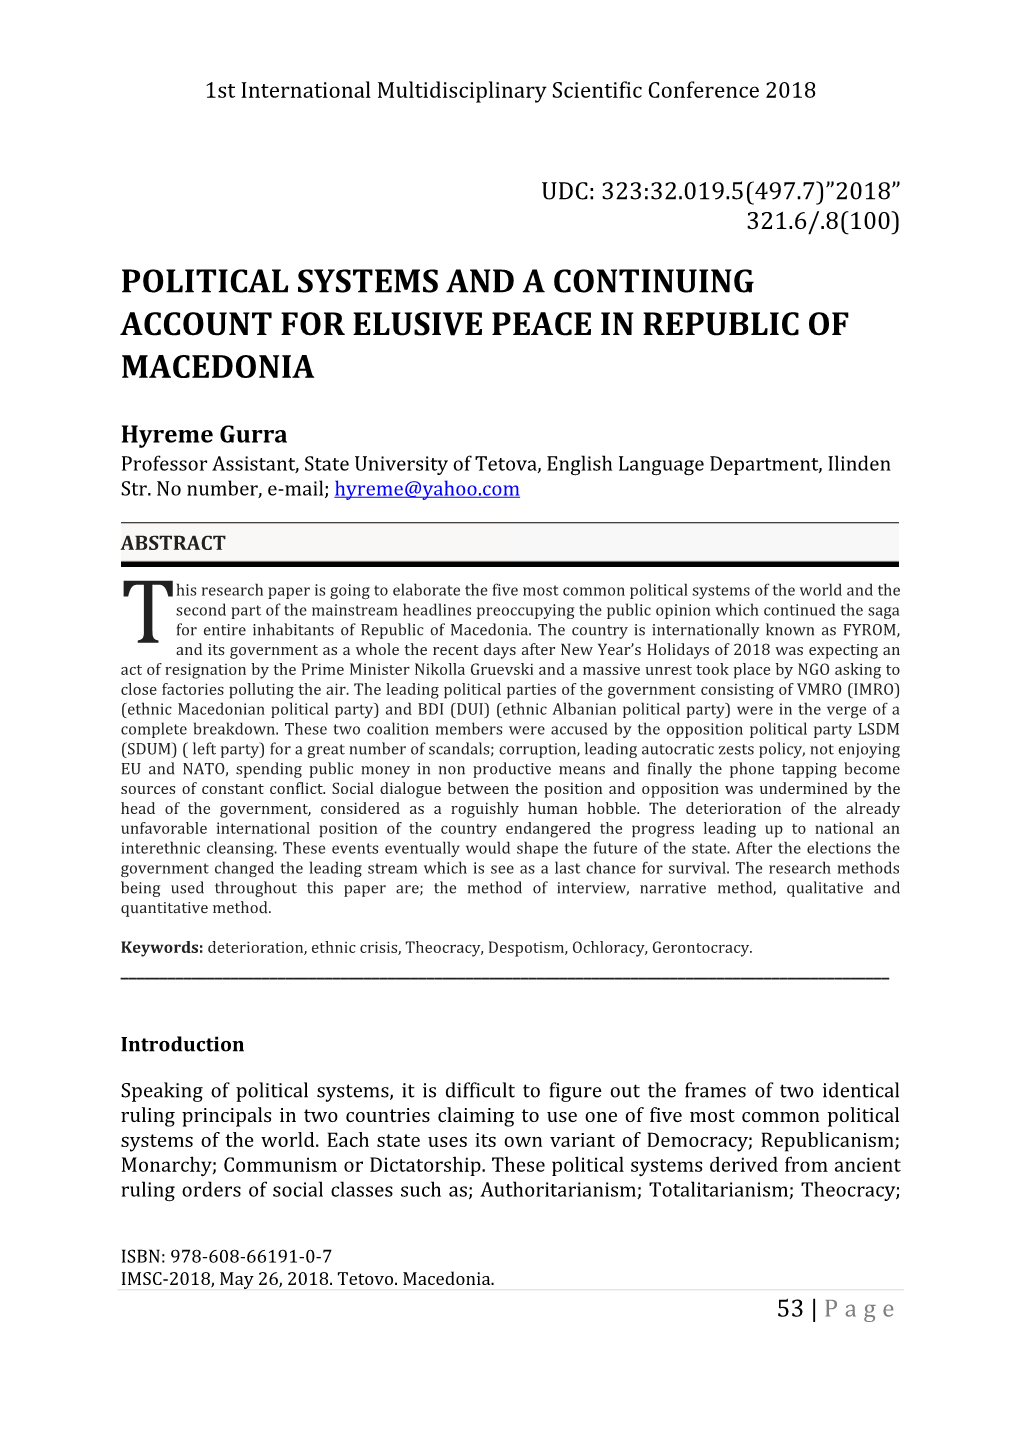 Political Systems and a Continuing Account for Elusive Peace in Republic of Macedonia